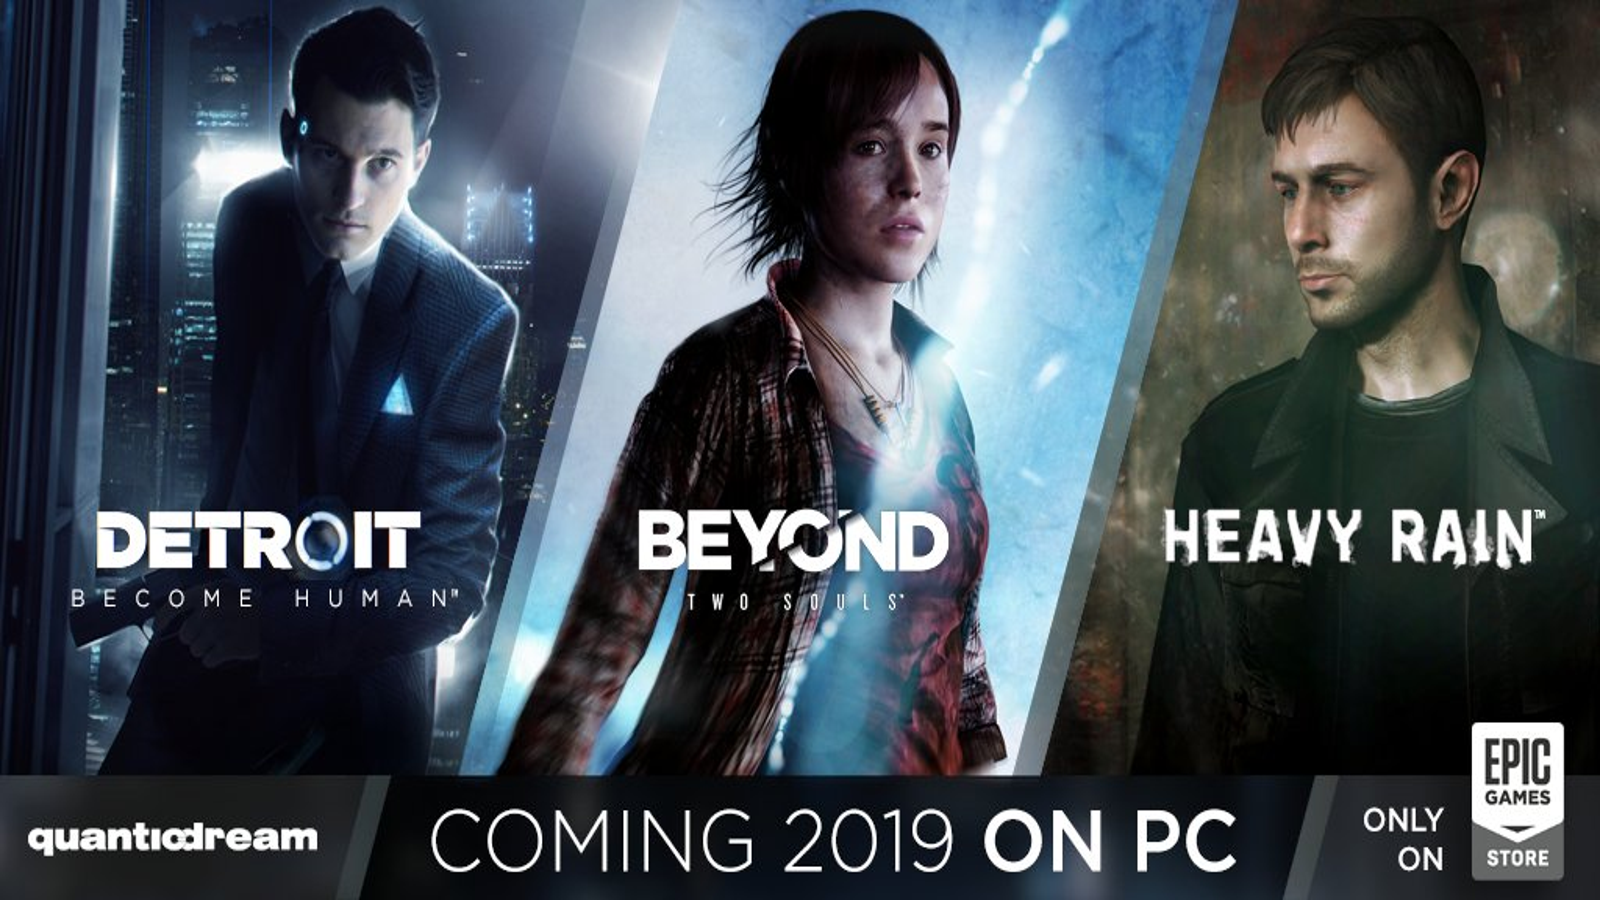 Detroit: Become Human PC (Steam)